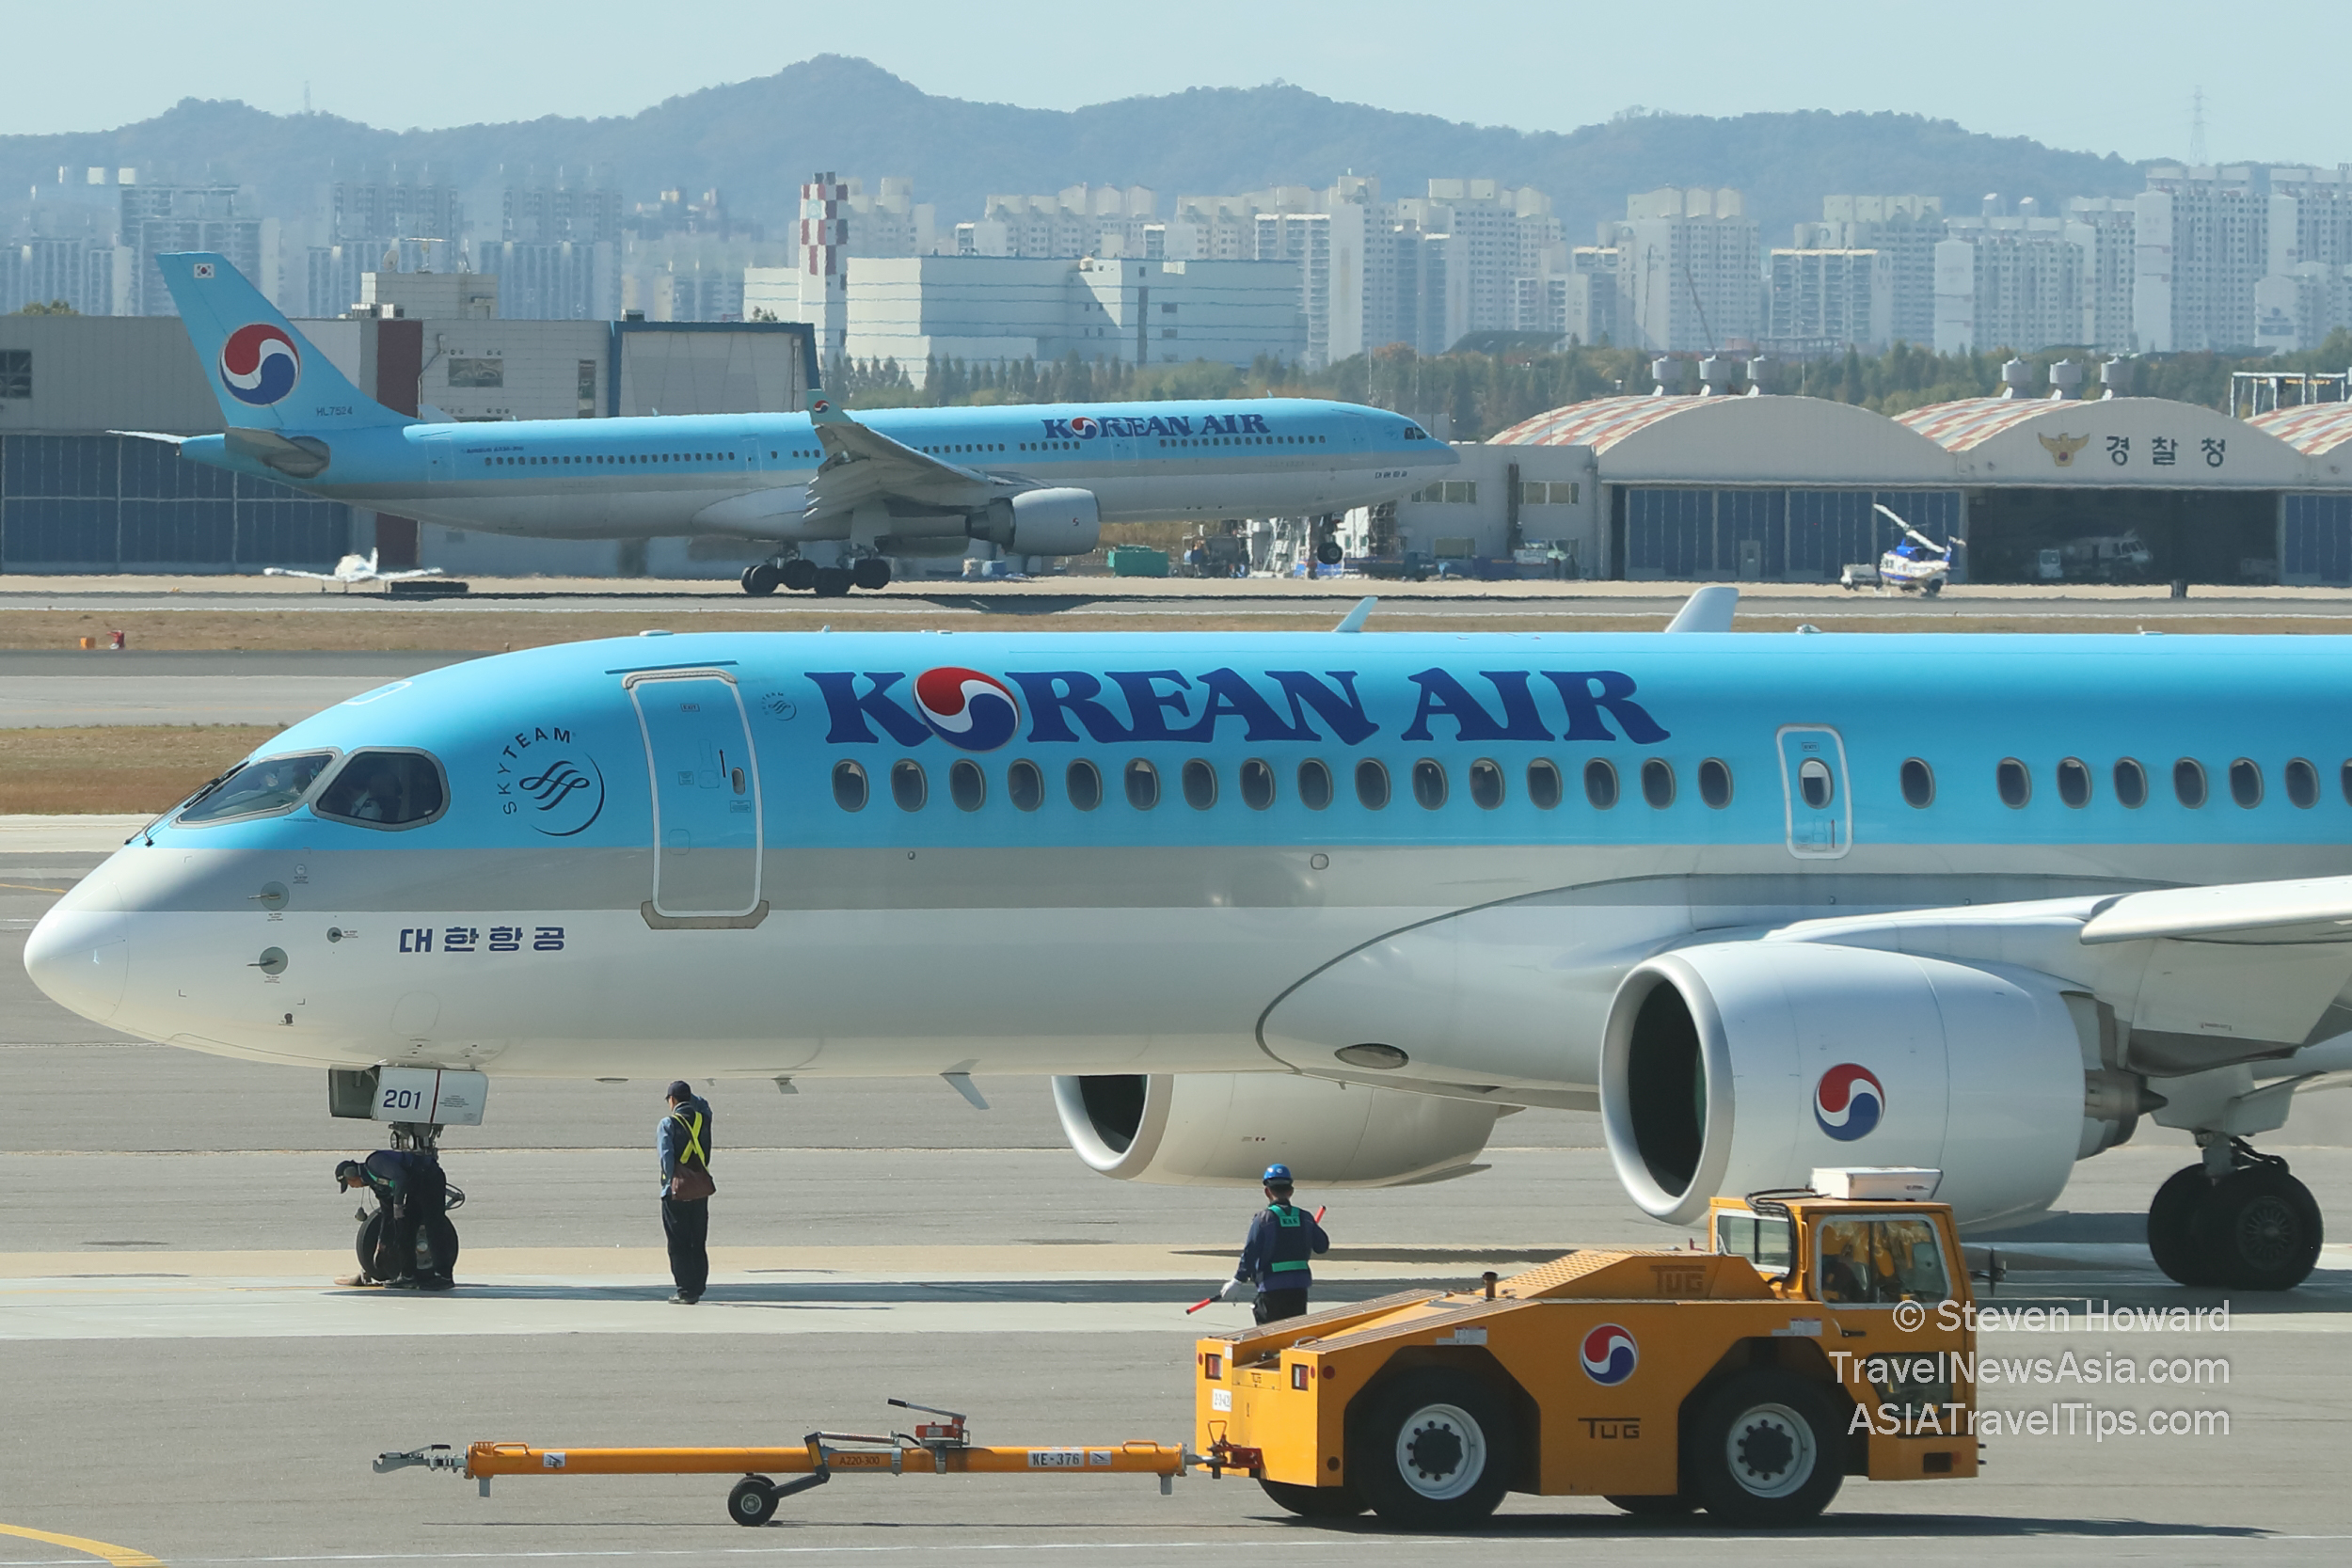 Korean Air A220-300 reg: HL7201 aircraft in the foreground and a Korean Air Airbus A333 reg: HL7524 taking off in the background. Picture by Steven Howard of TravelNewsAsia.com Click to enlarge.